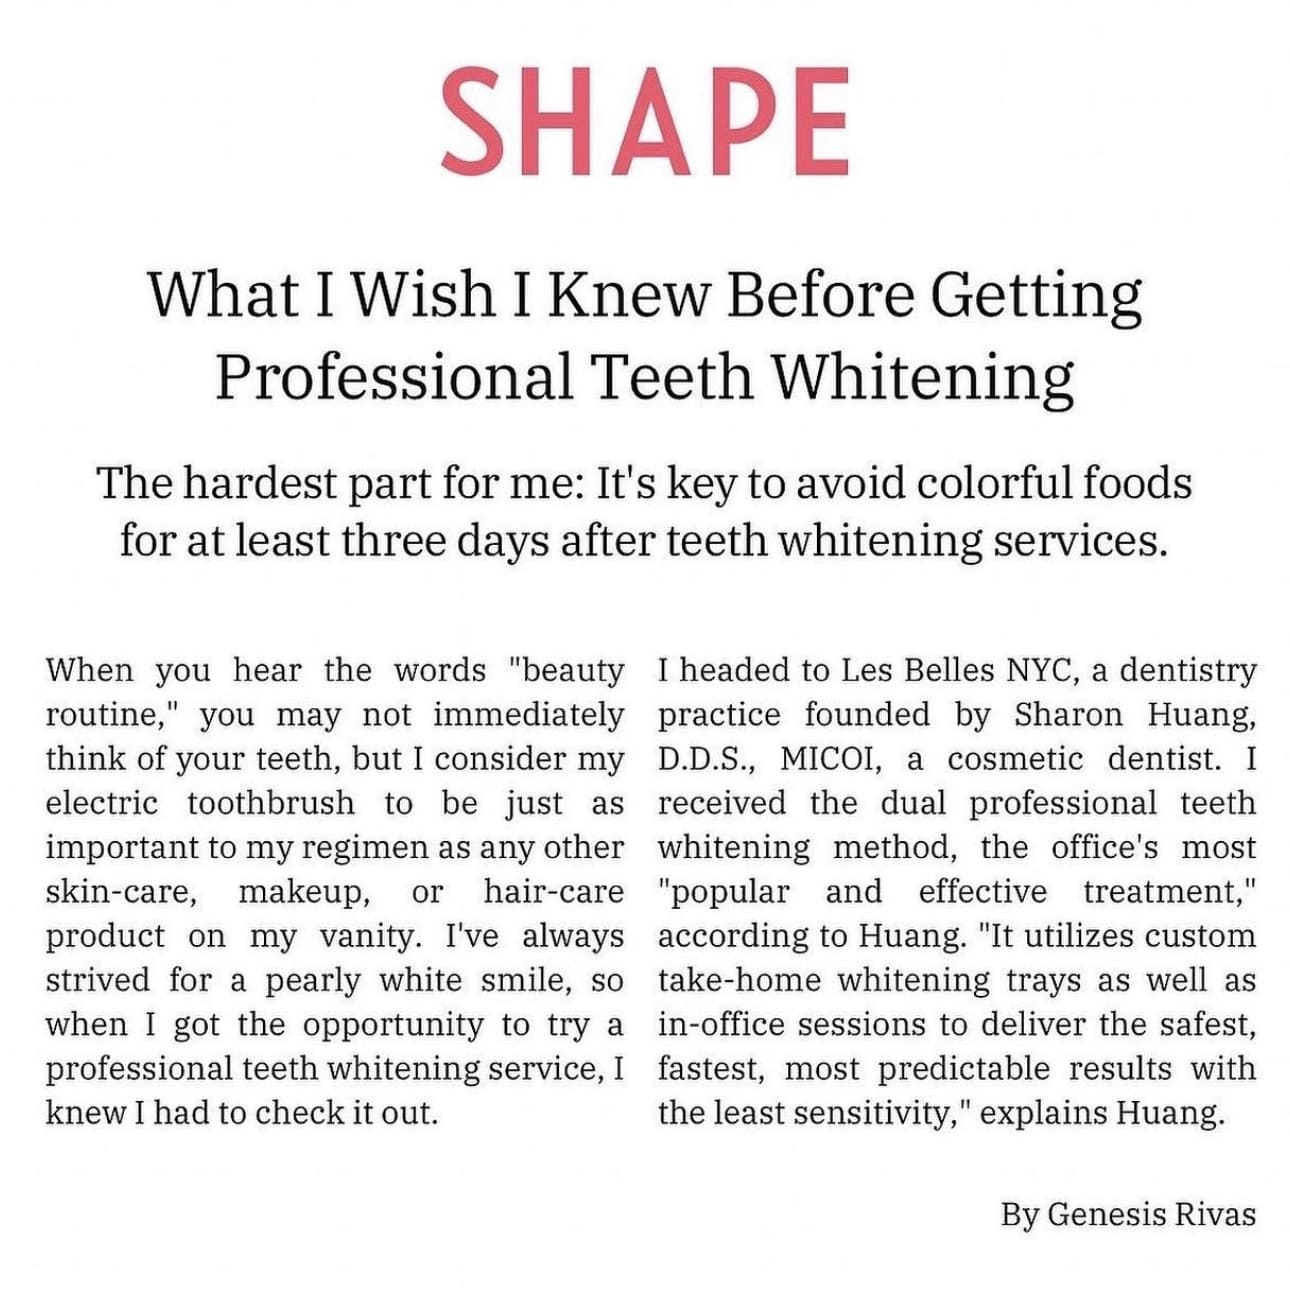 What I Wish I Knew Before Getting Professional Teeth Whitening